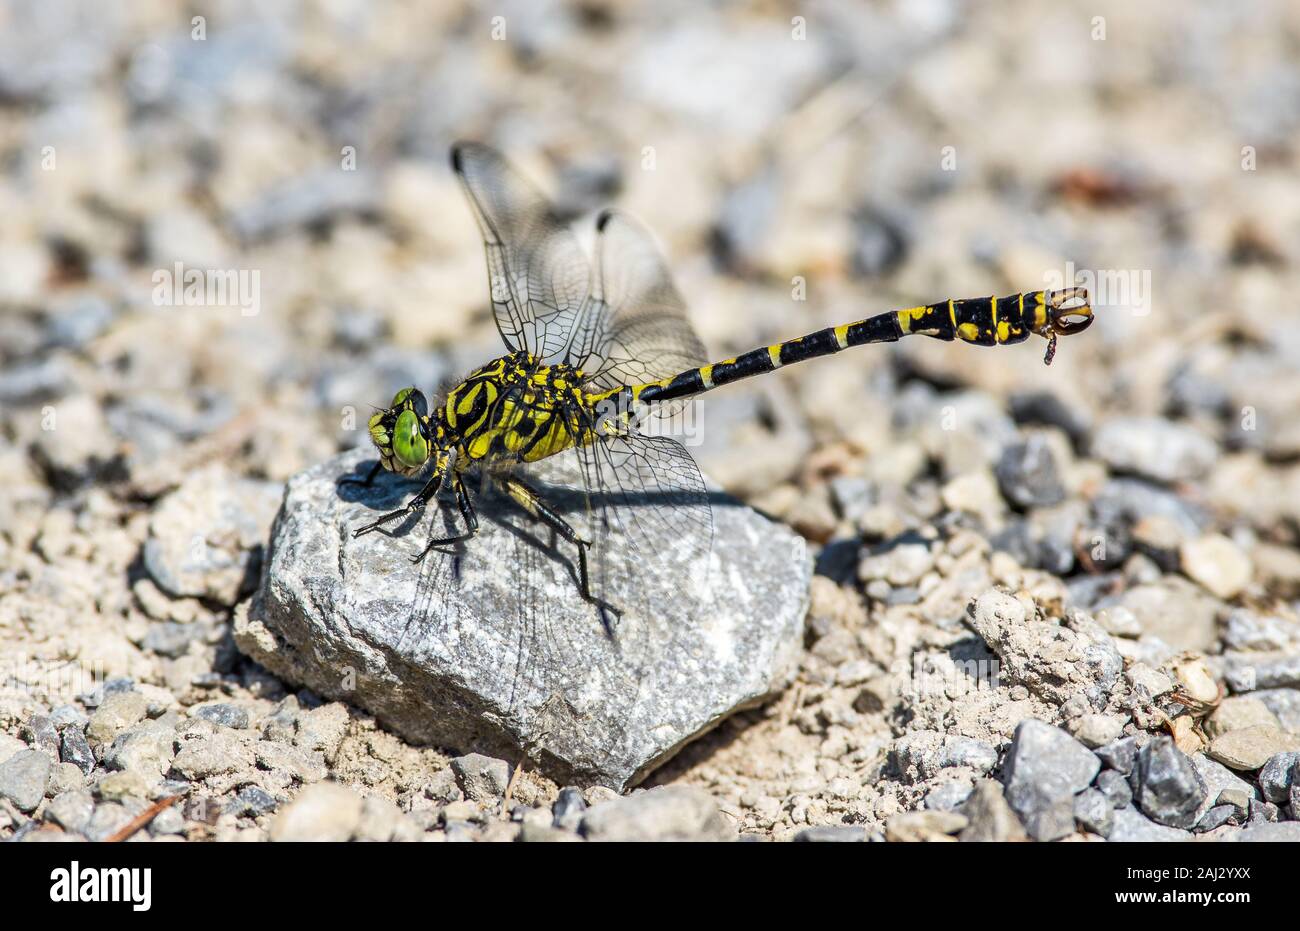 Green eyed hook tailed dragonfly is an ancient insect. The male dragonfly features hook-shaped appendages. Rare. Green compound eyes, yellow body. Stock Photo